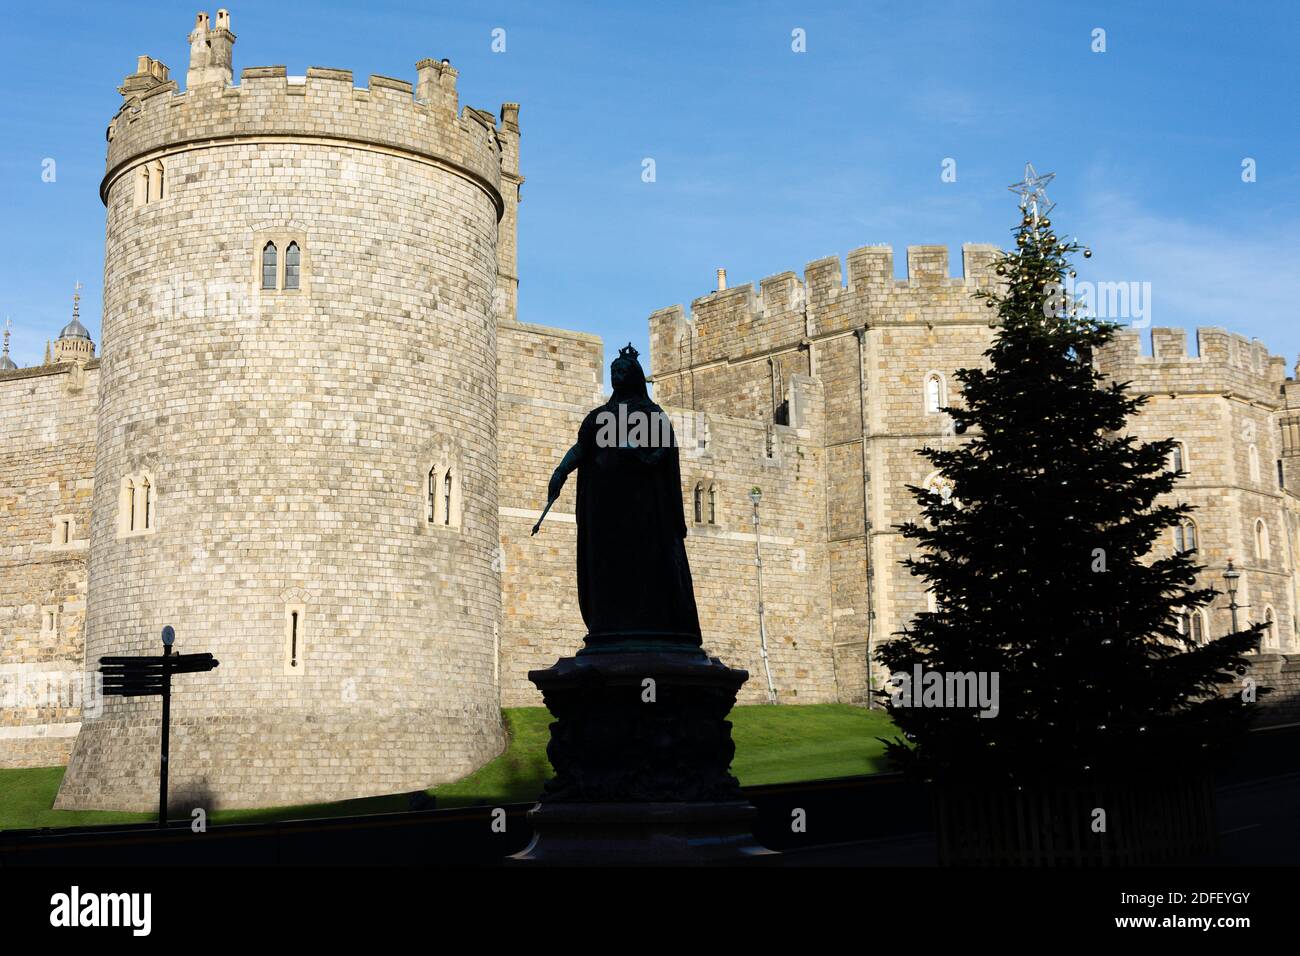 Silhouette of Queen Victoria Statue and Christmas Tree in front of Windsor Castle walls, Castle Hill, Windsor, Berkshire, England, United Kingdom Stock Photo